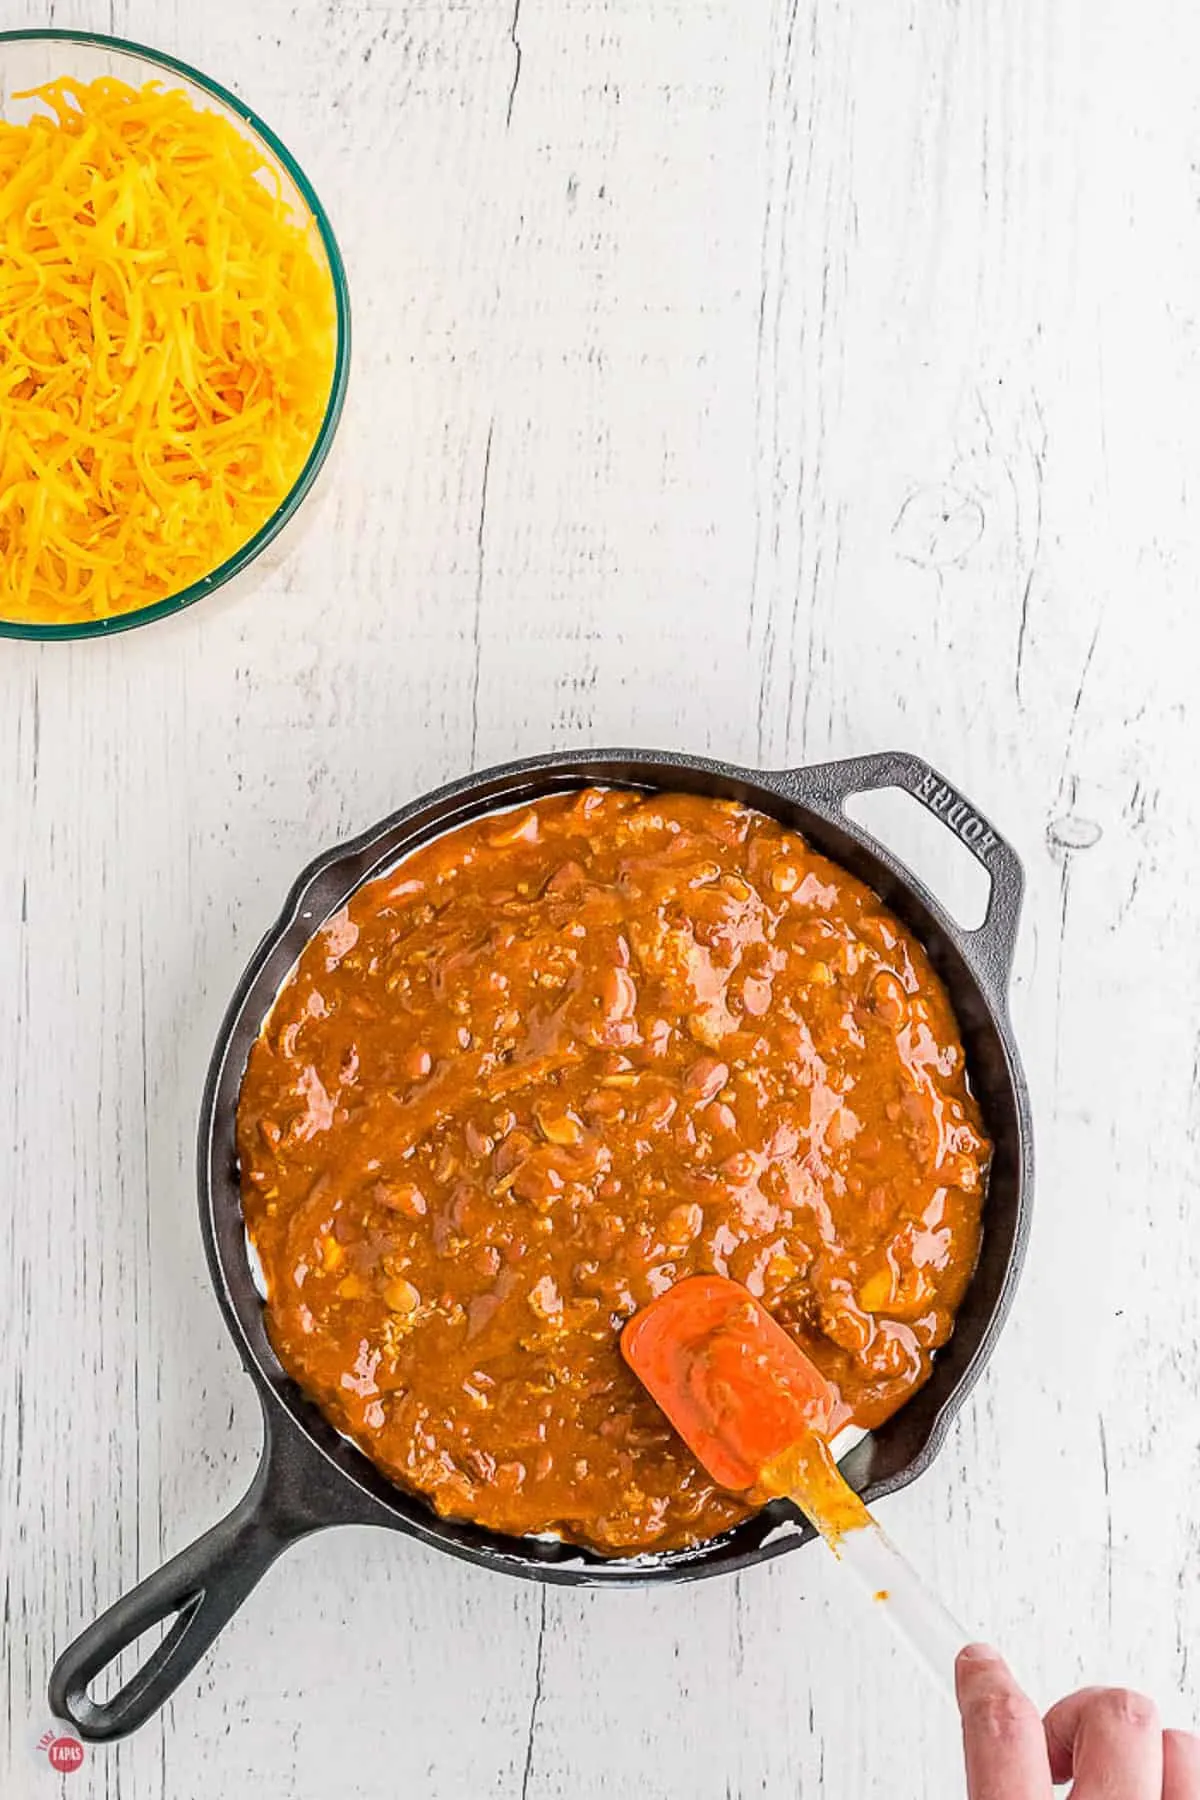 chili in a skillet with a spatula